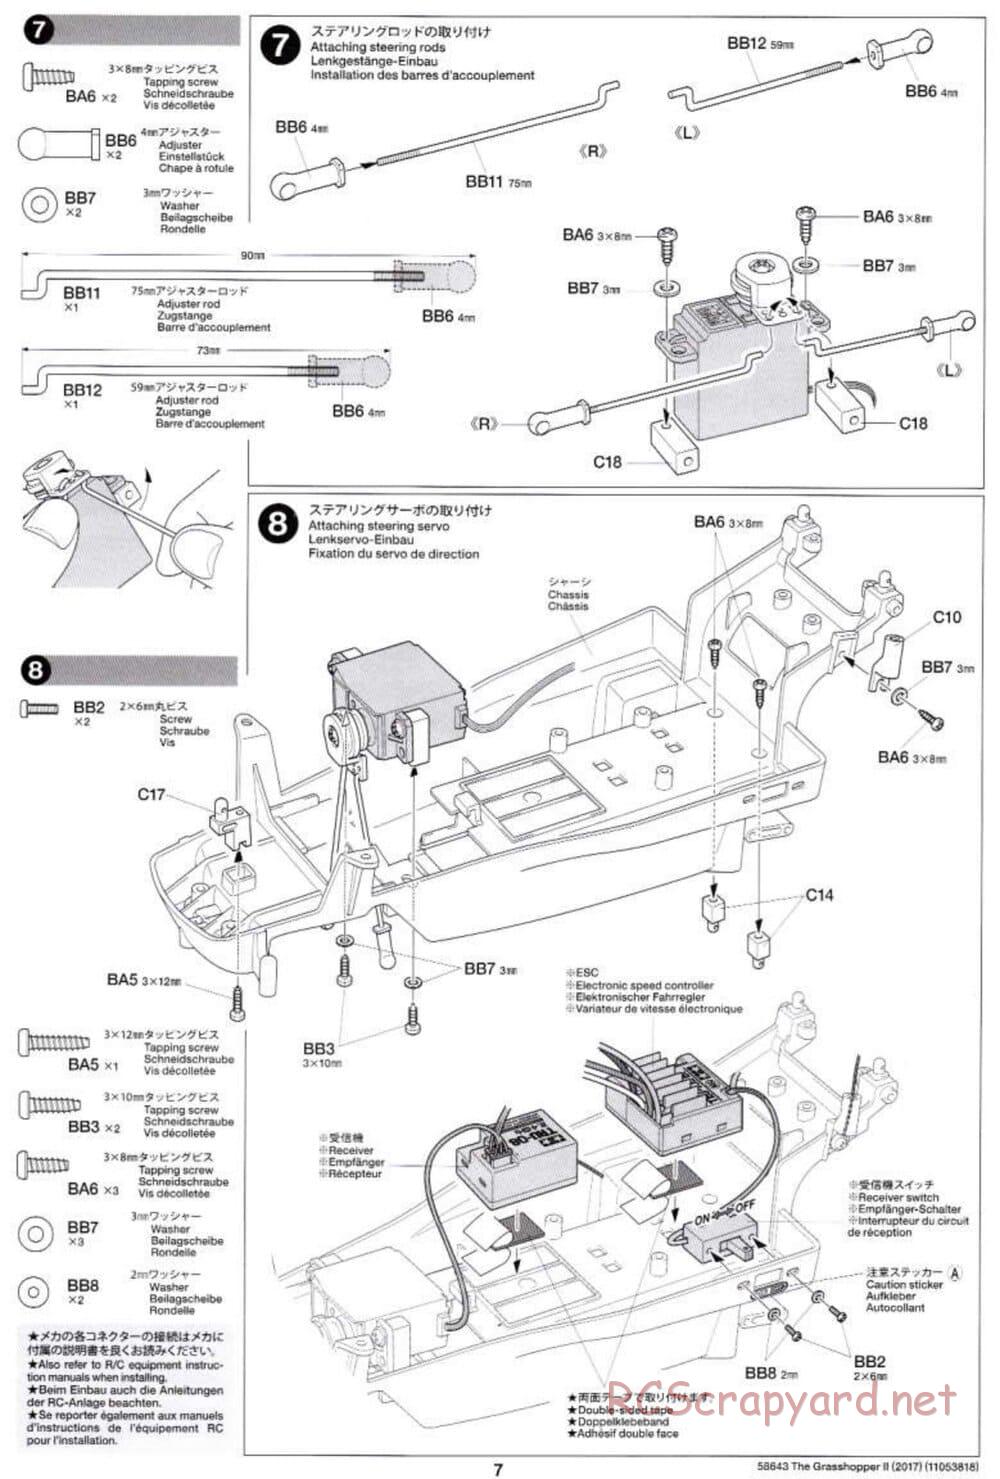 Tamiya - The Grasshopper II (2017) - GH Chassis - Manual - Page 7